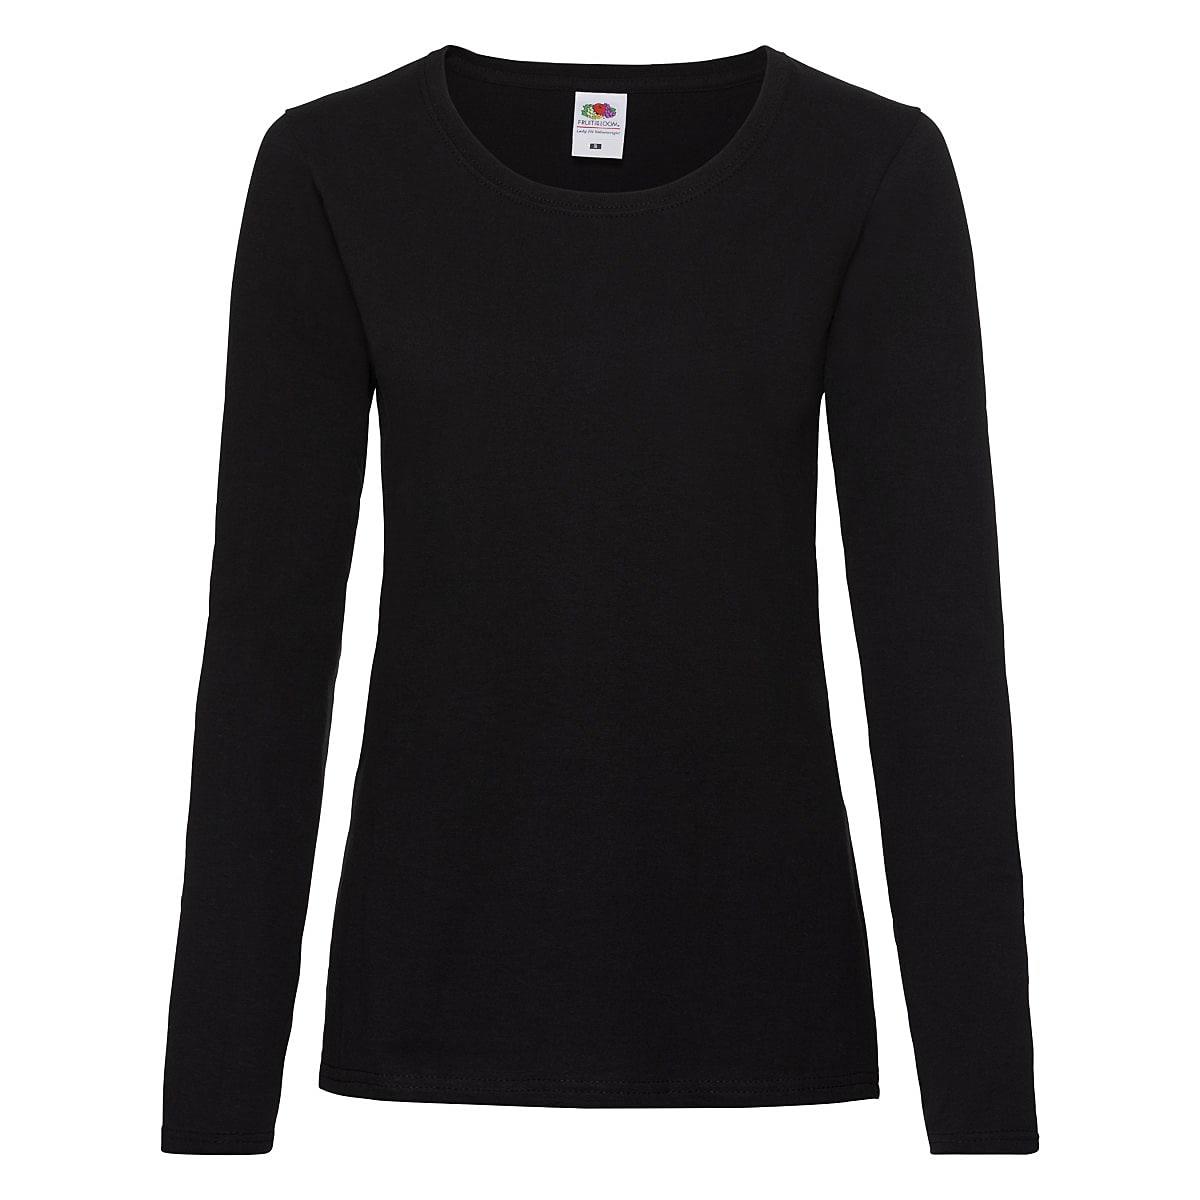 Fruit Of The Loom Lady-Fit Valueweight Long-Sleeve T-Shirt in Black (Product Code: 61404)